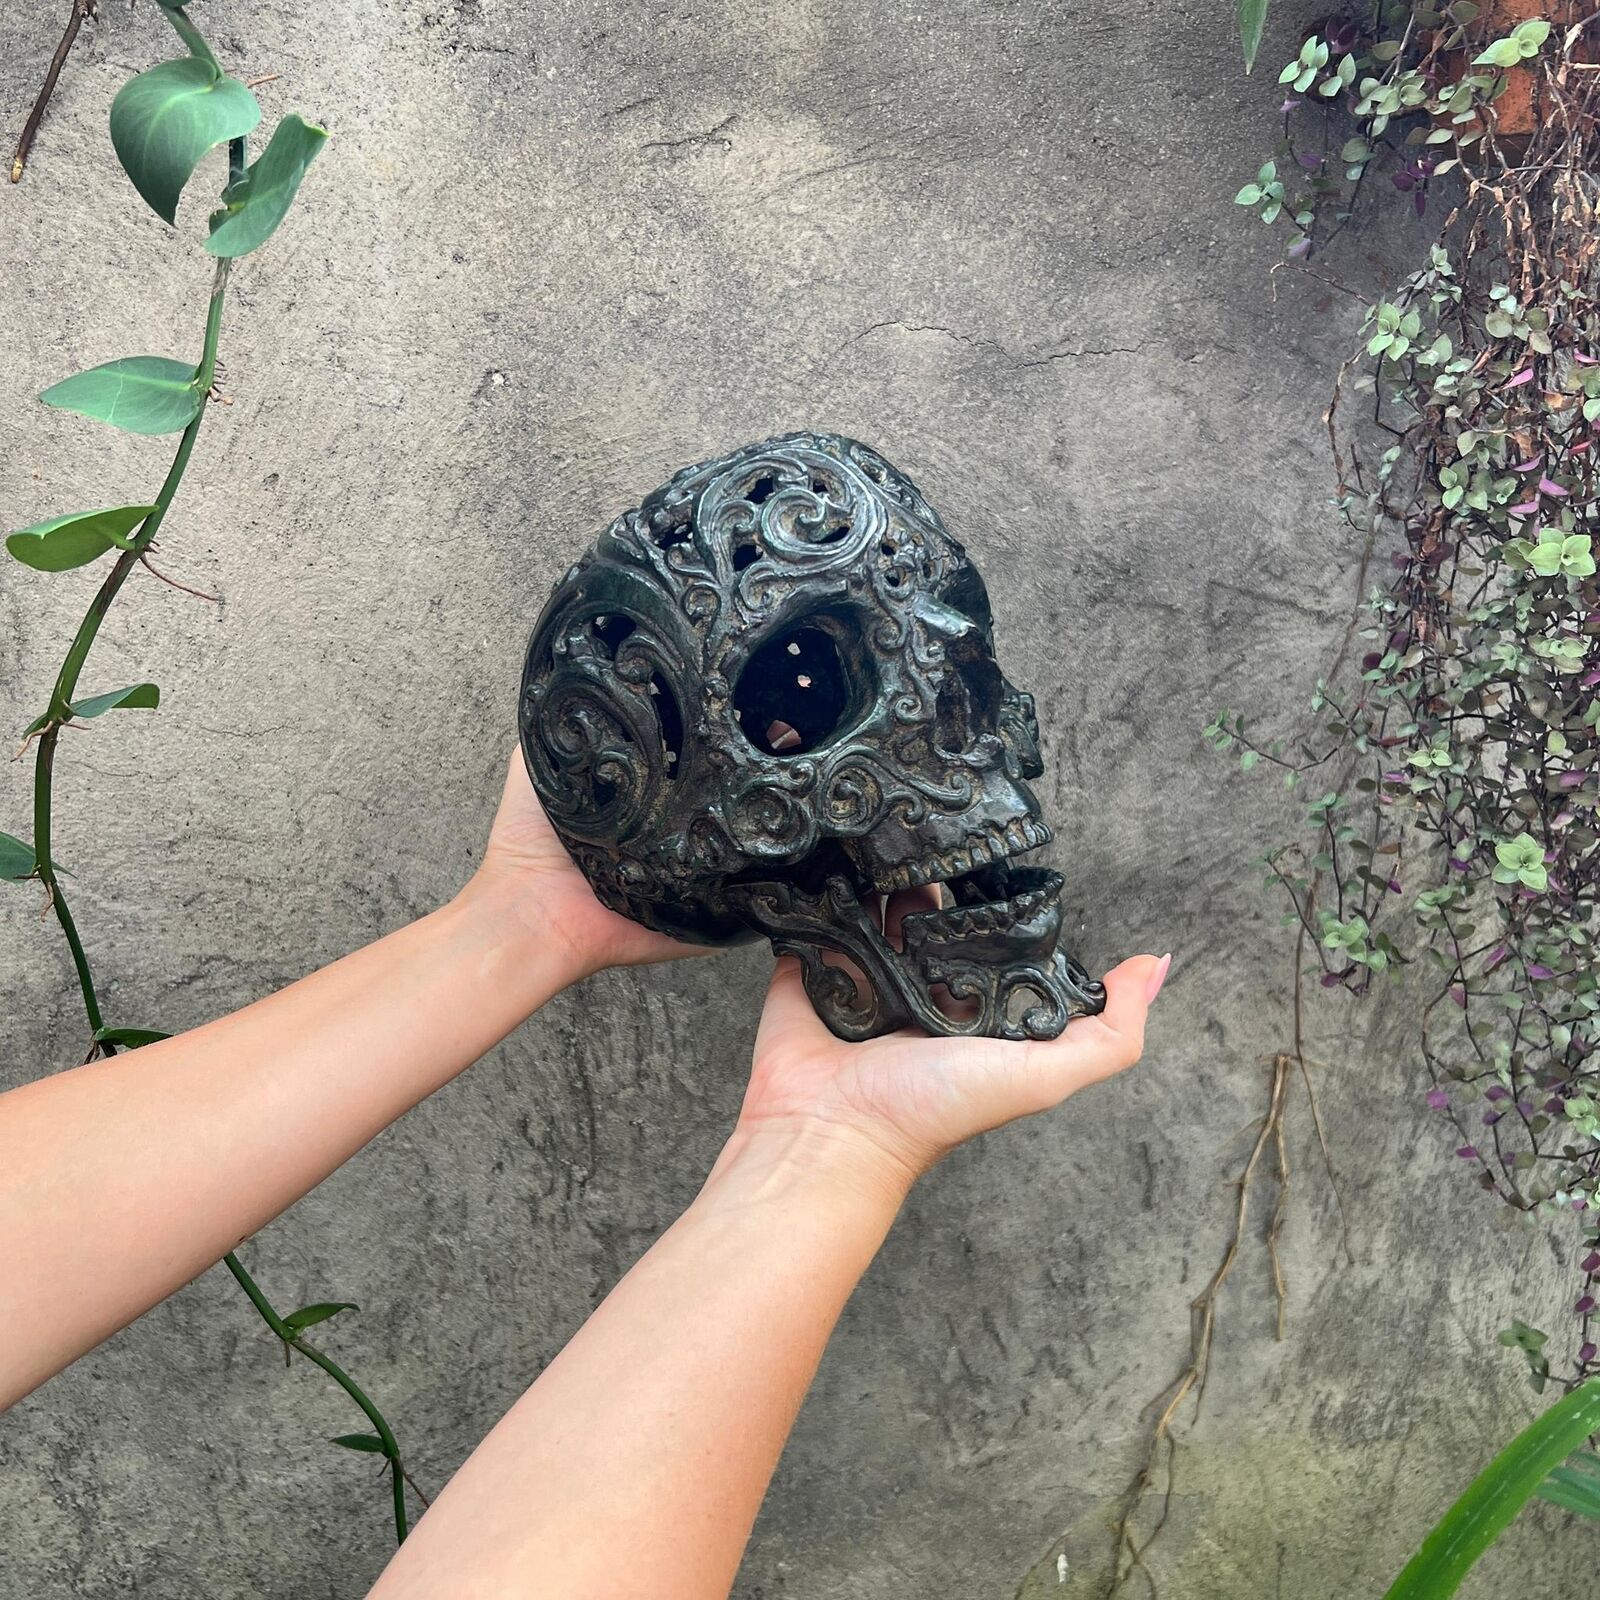 Big Bronze Skull with Carving Pattern